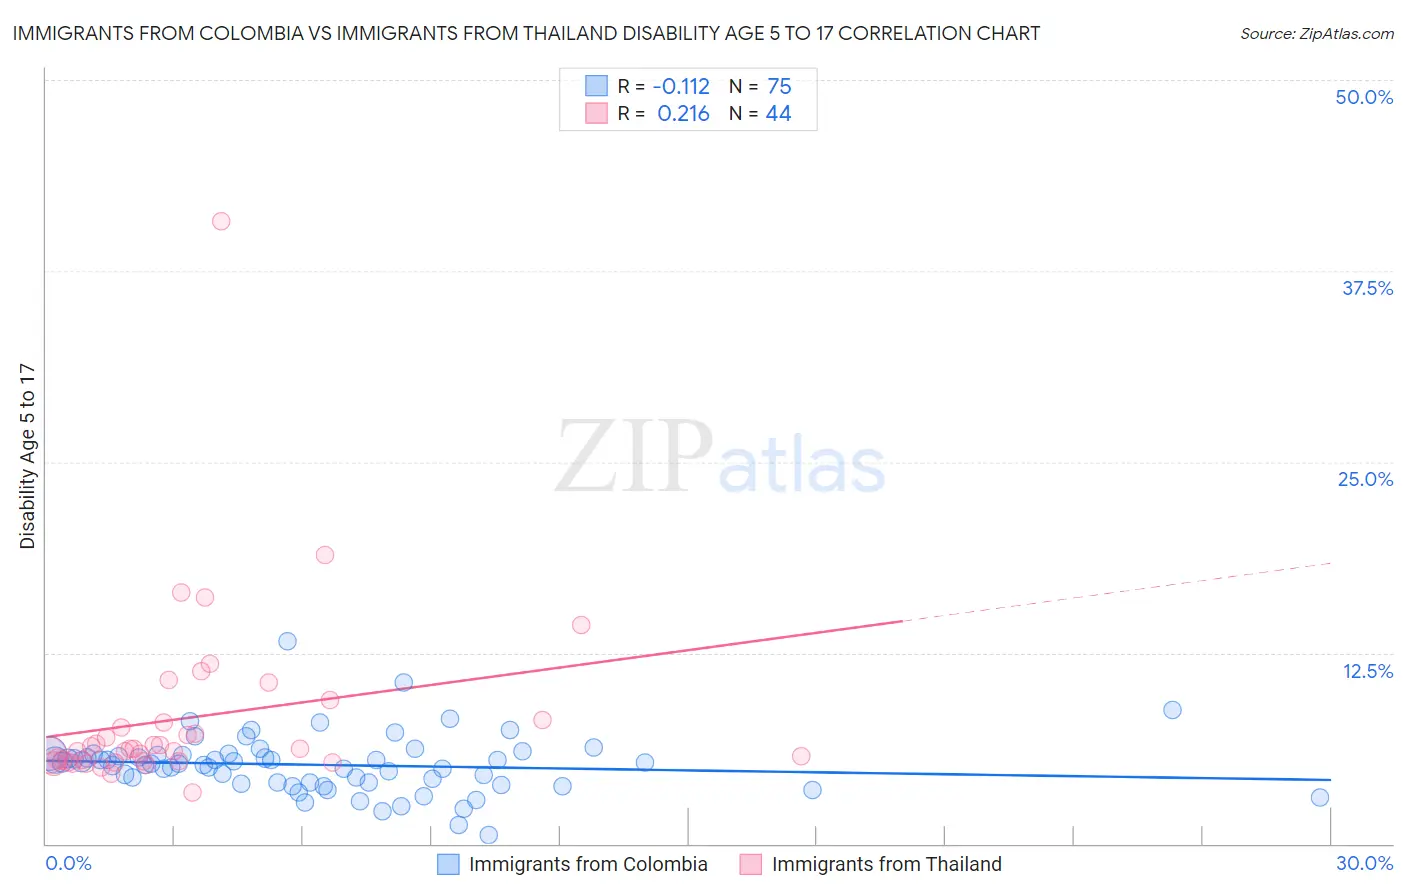 Immigrants from Colombia vs Immigrants from Thailand Disability Age 5 to 17